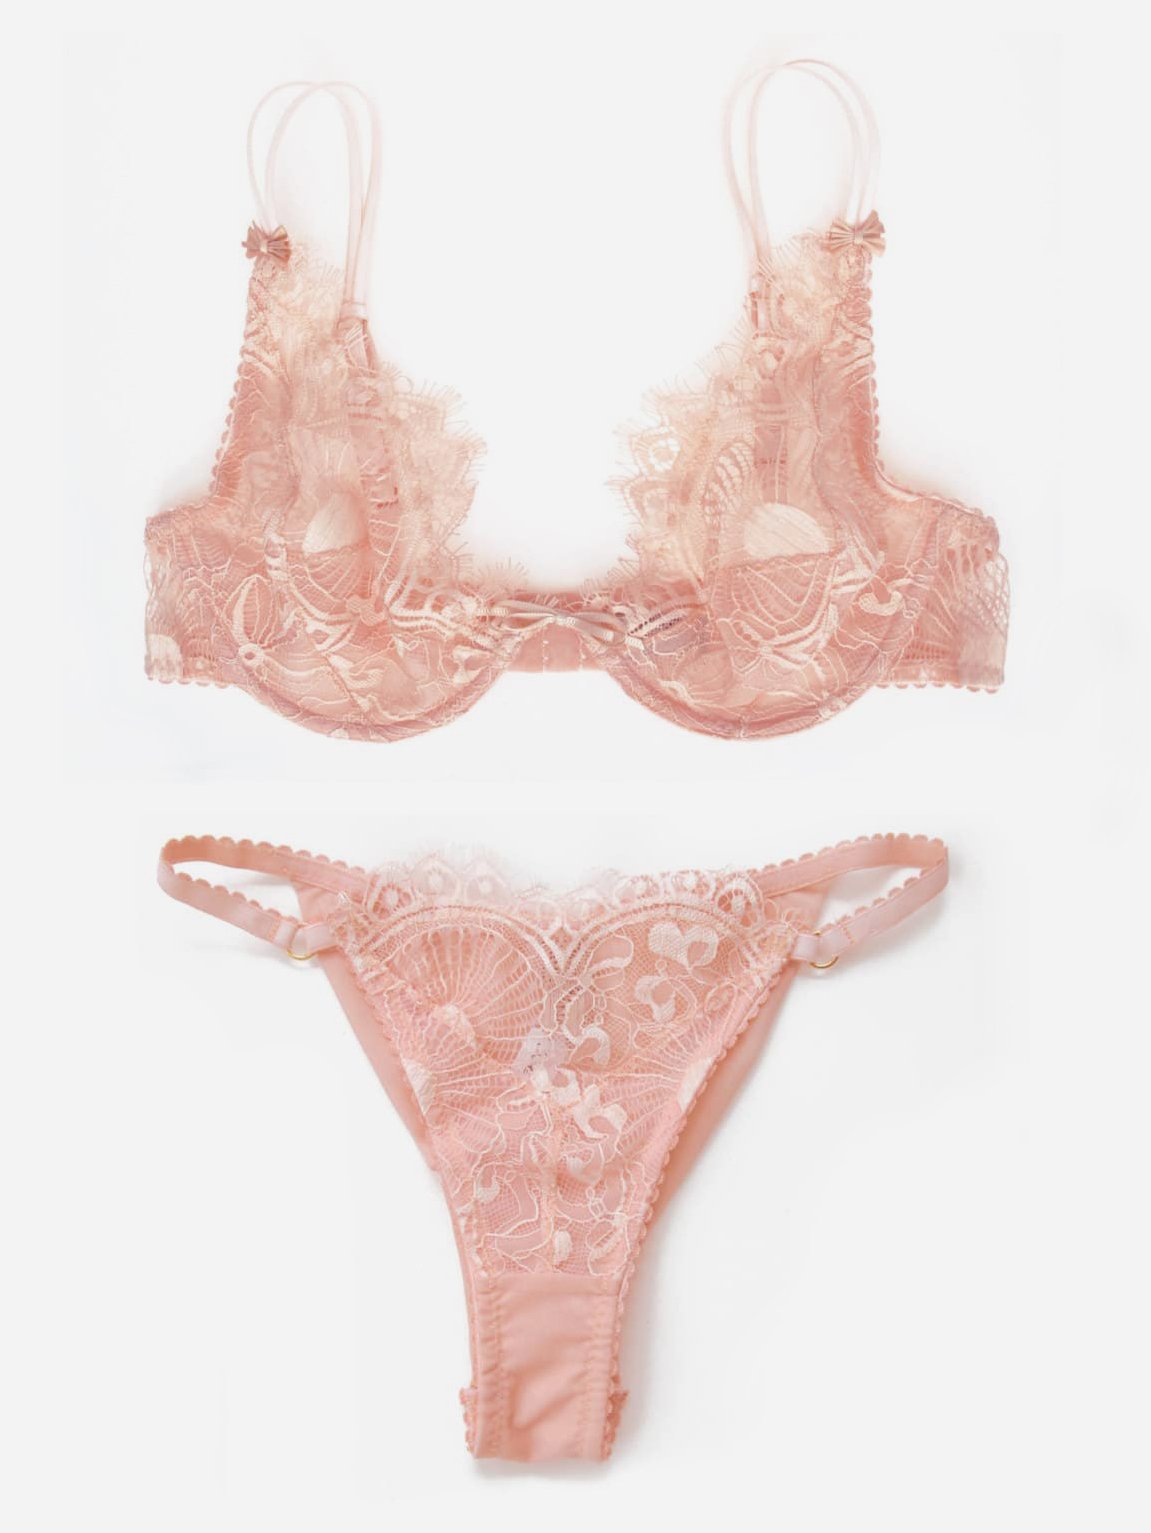 Pink Lace lingerie: Lace bra and tanga in powder pink - Made to